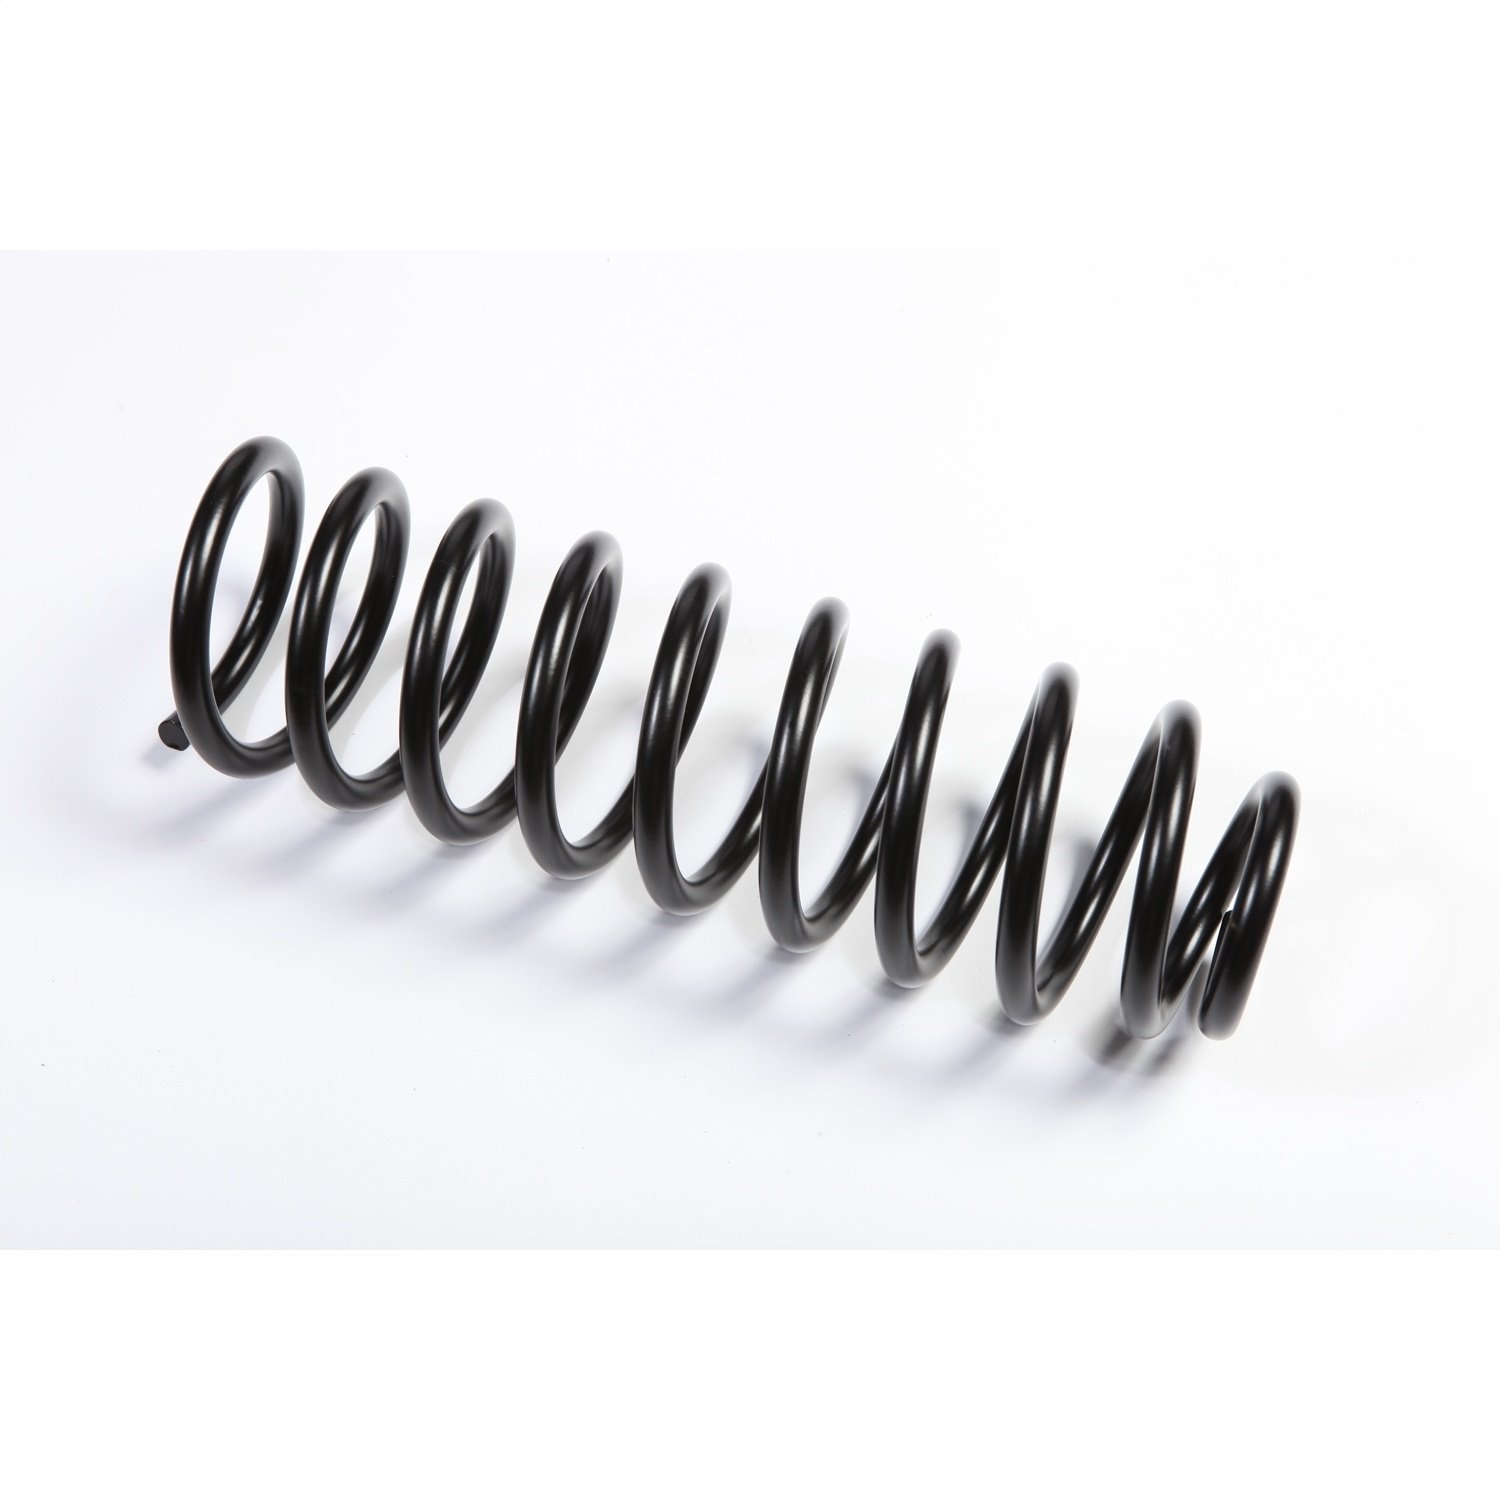 Heavy duty replacement front coil spring from Omix-ADA, Fits 93-98 Jeep Grand Cherokee ZJ